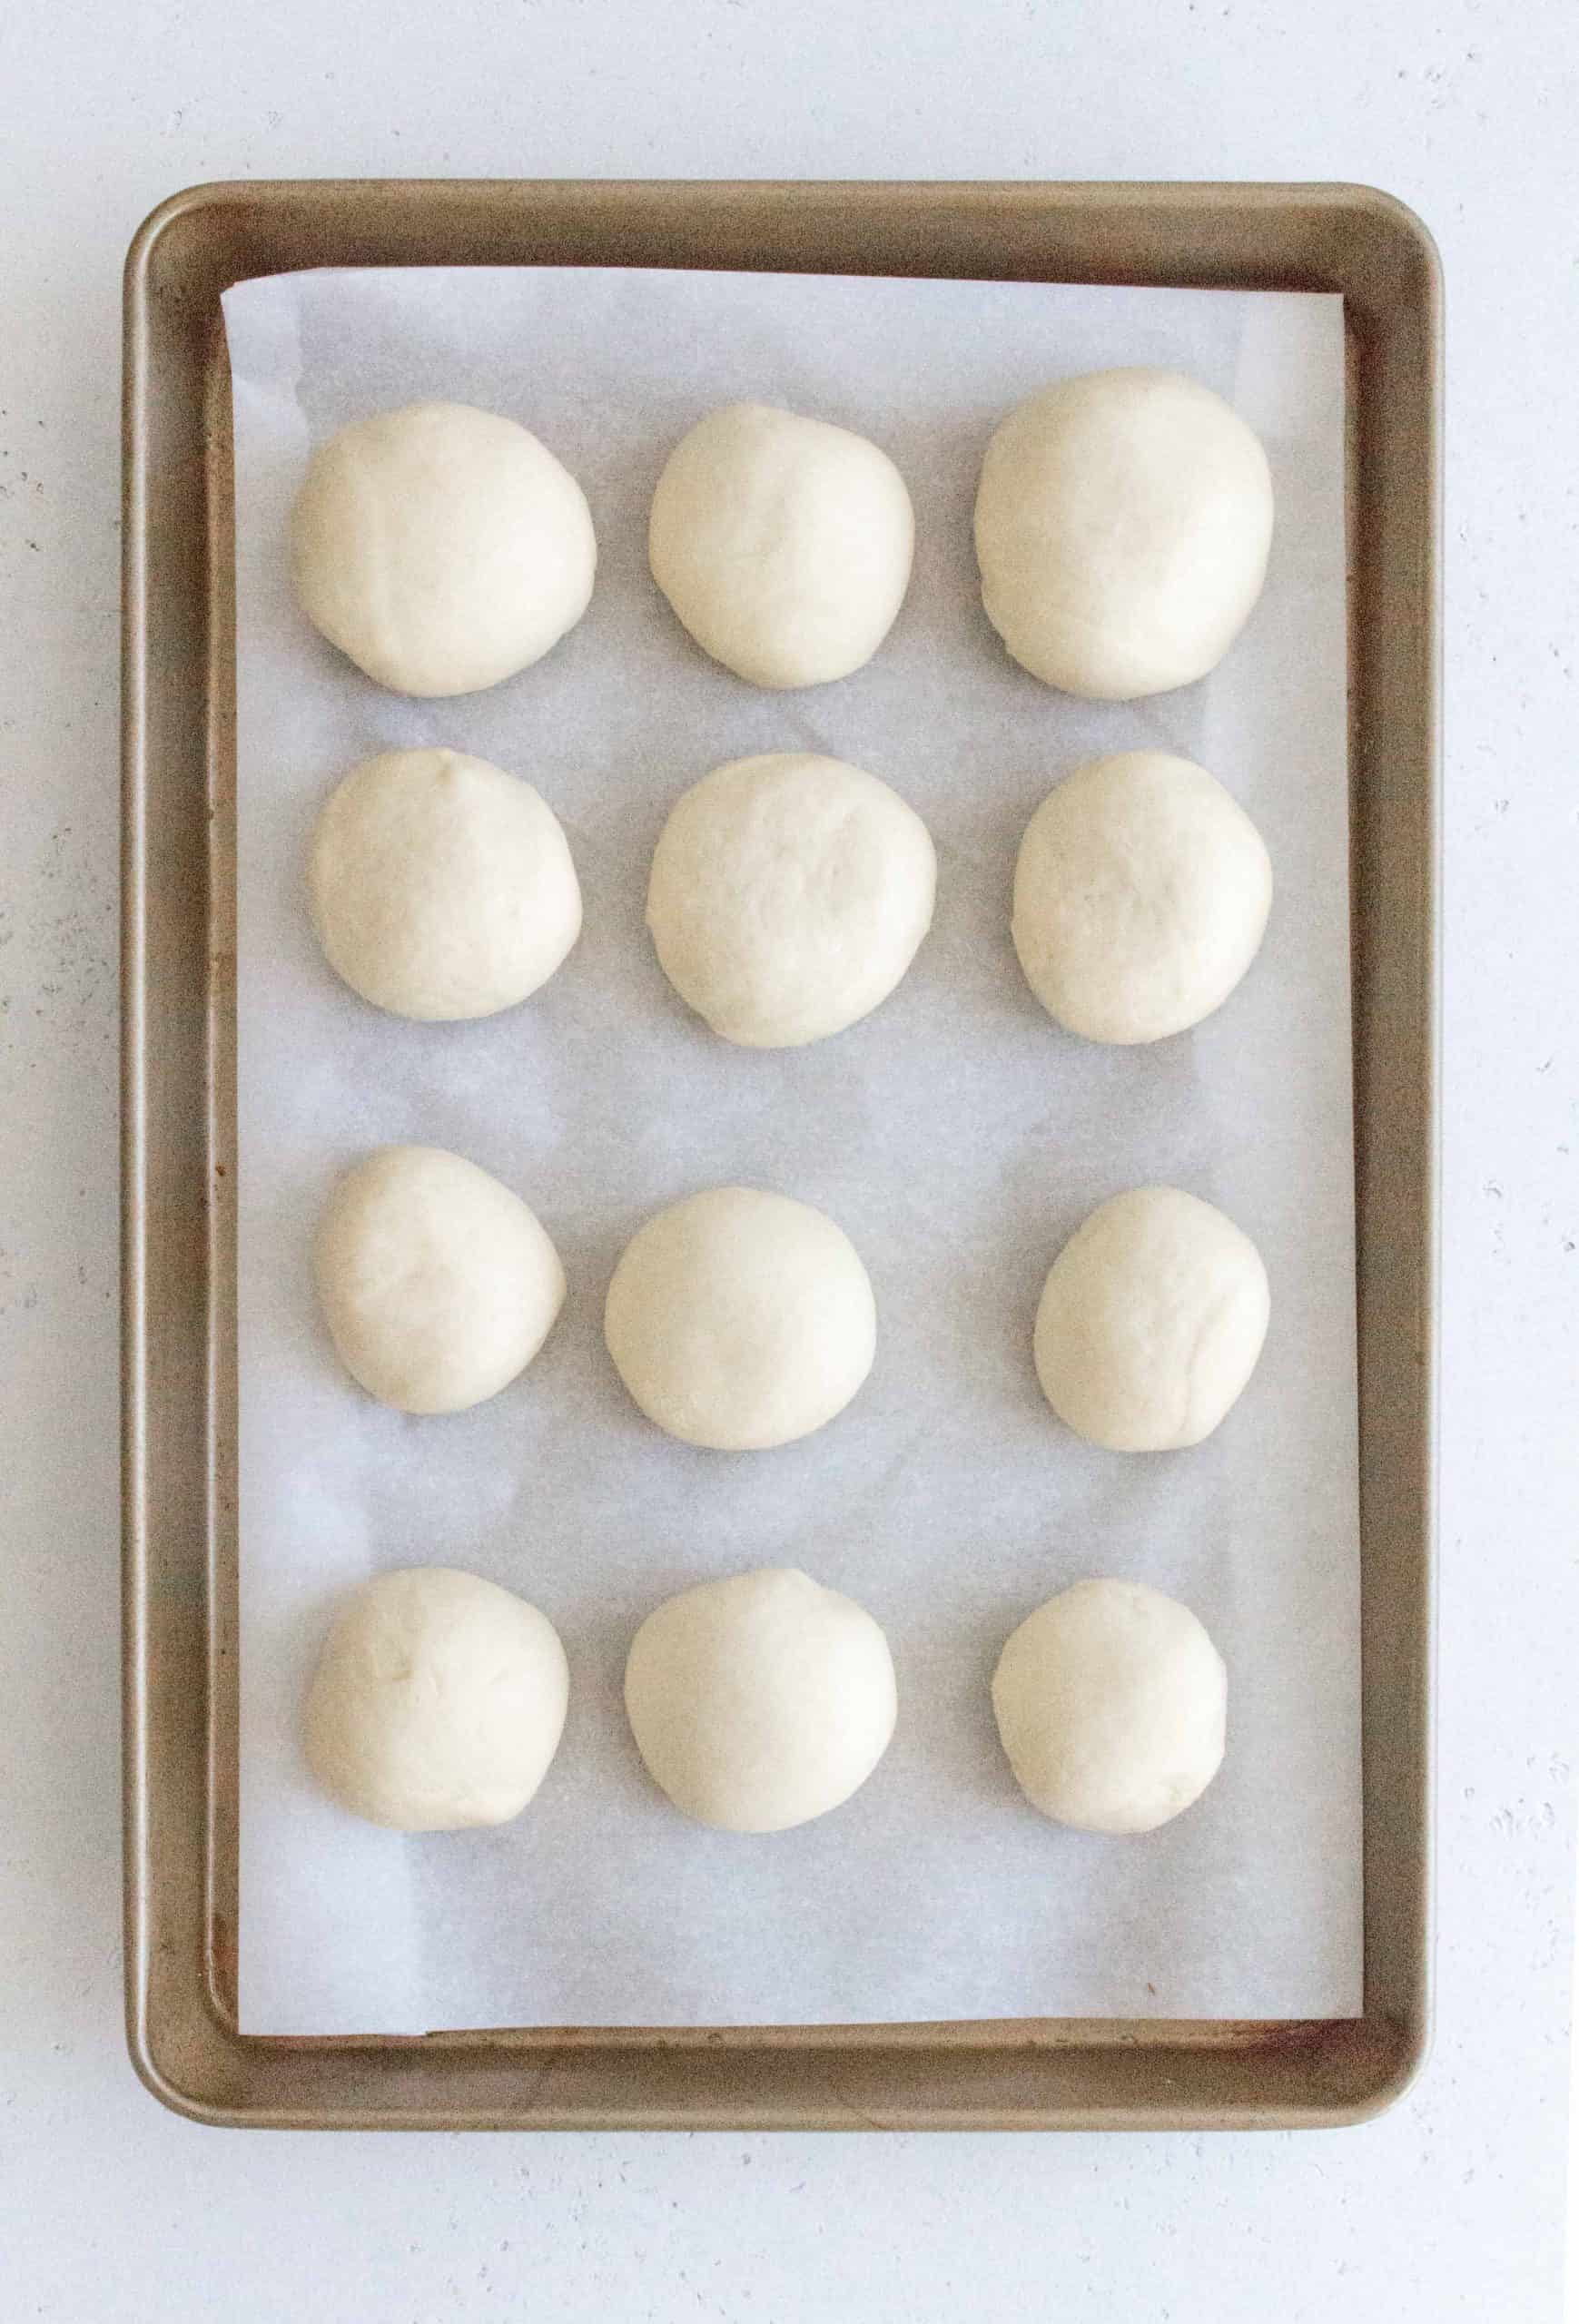 Place the dough balls into a grease 9x12 pan, cover, and let proof for 10 minutes.